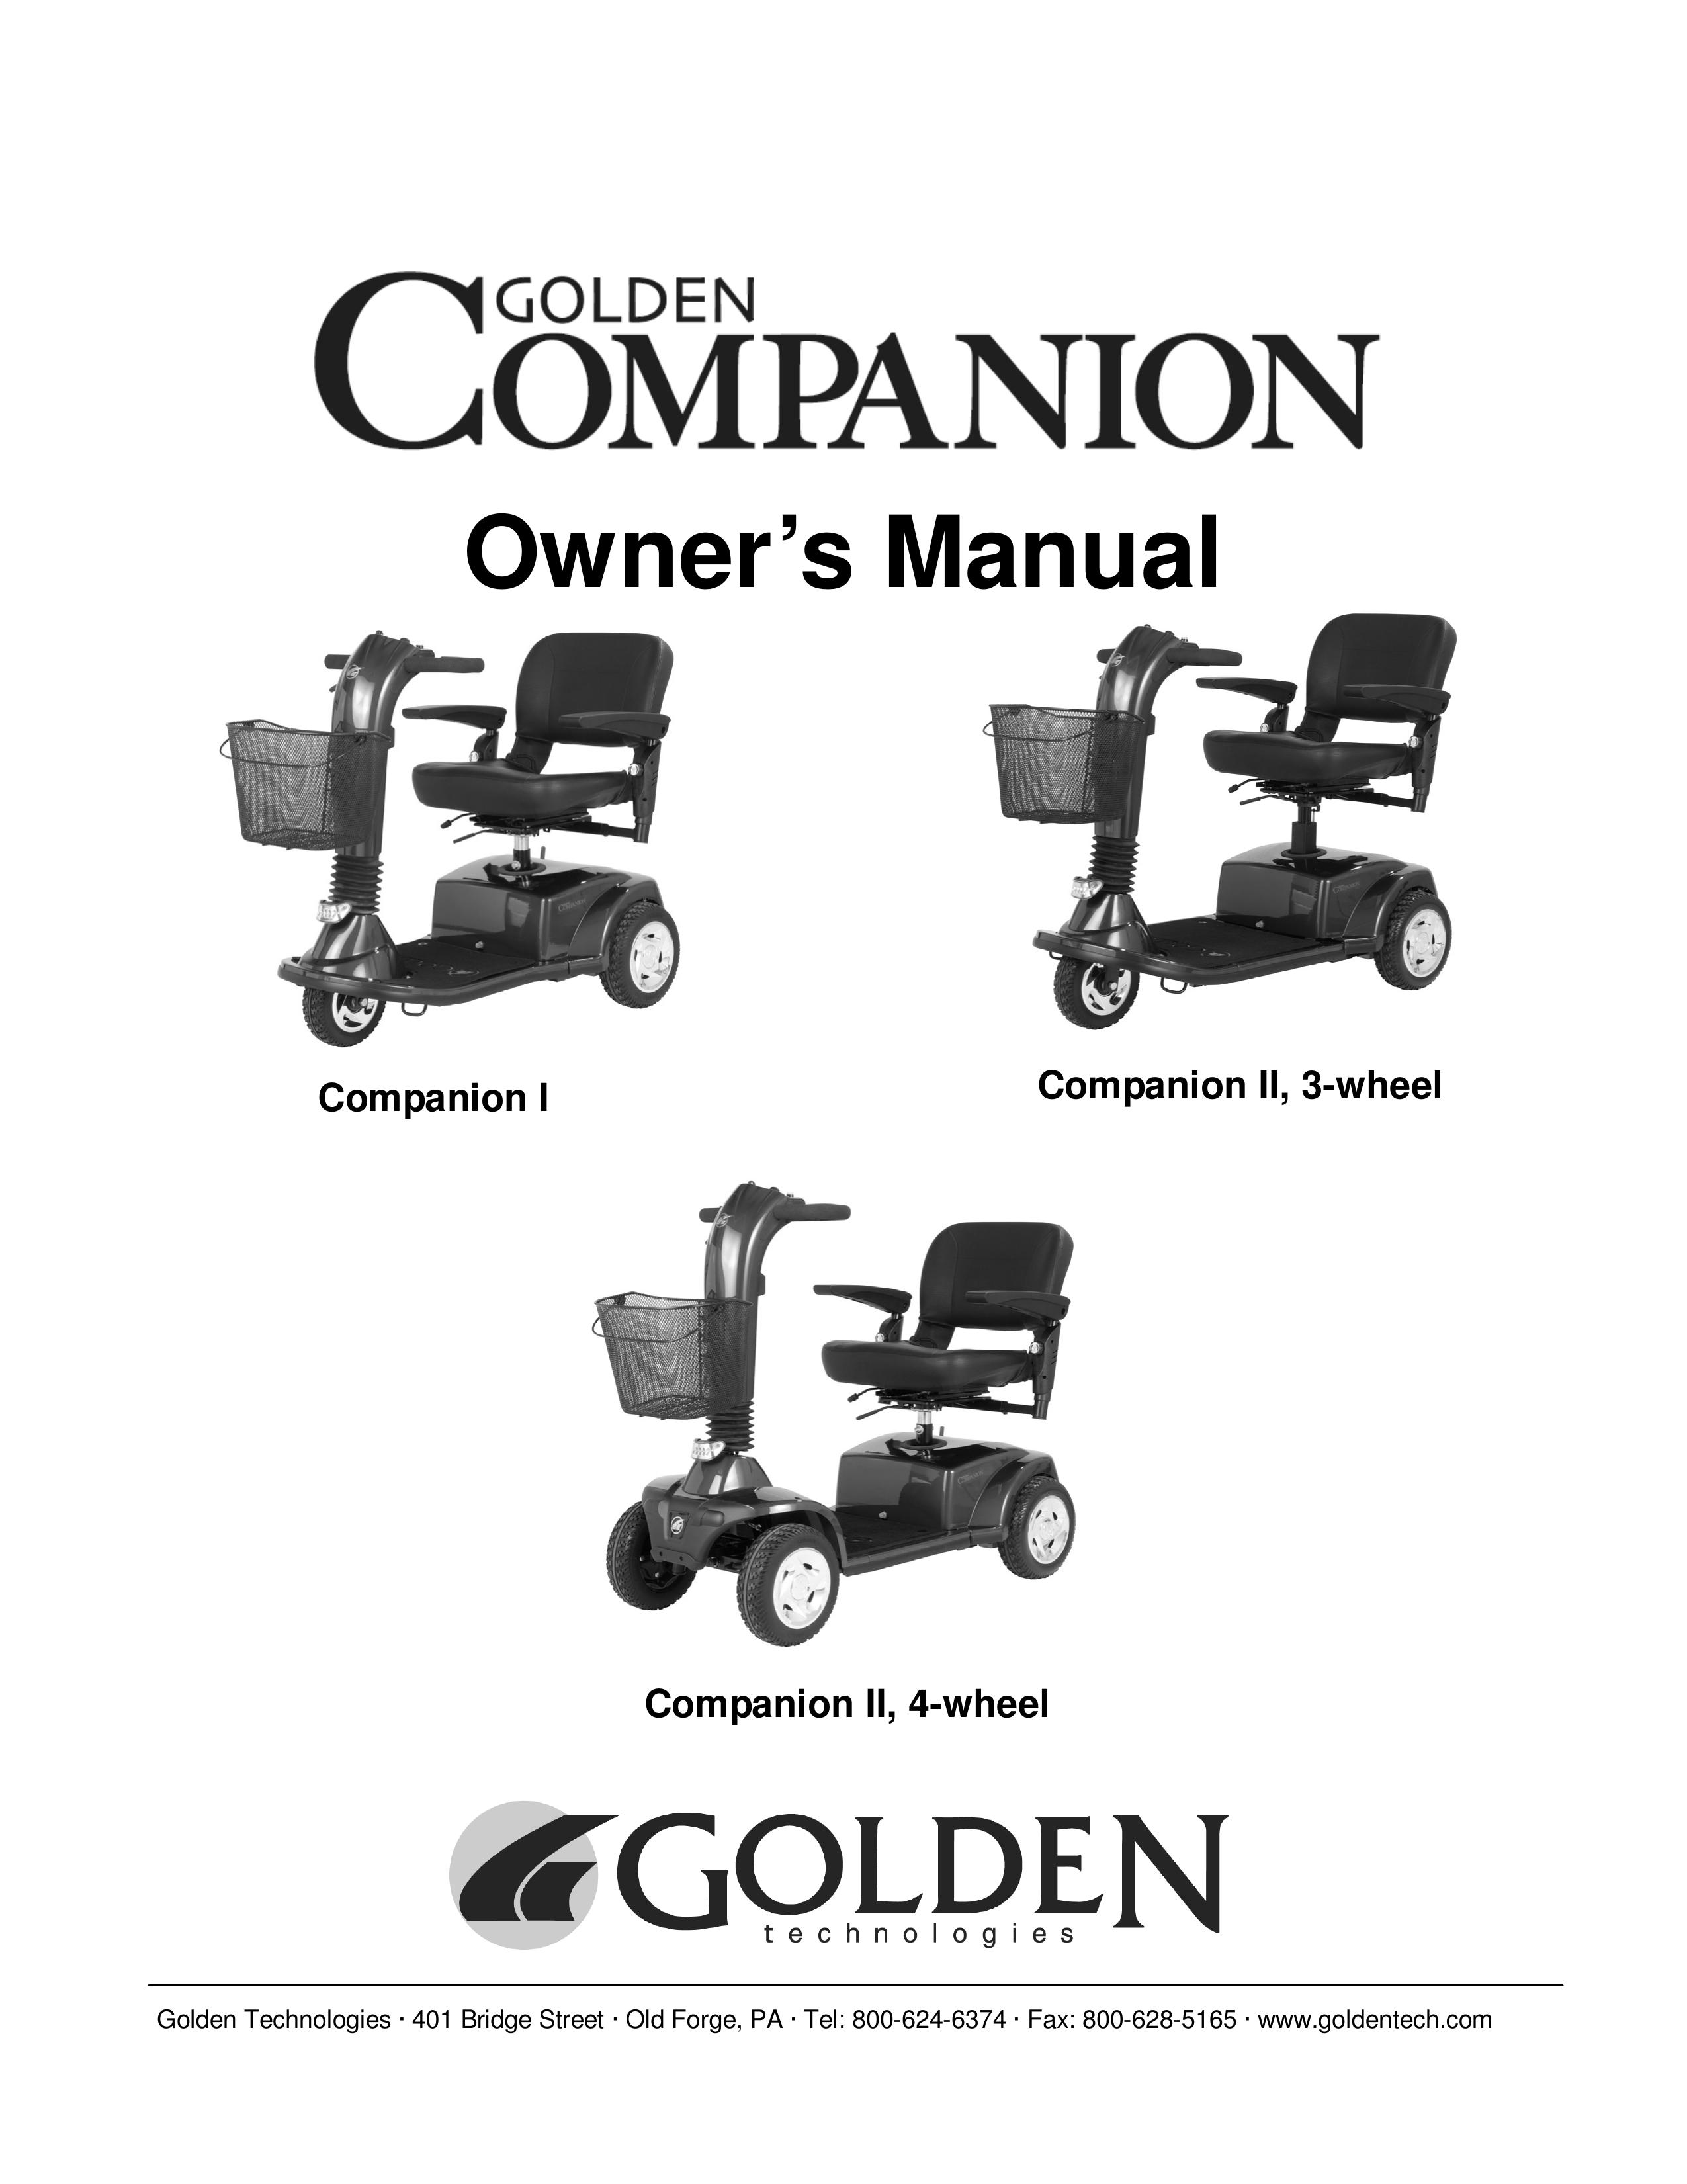 Golden Technologies GC440 Mobility Scooter User Manual